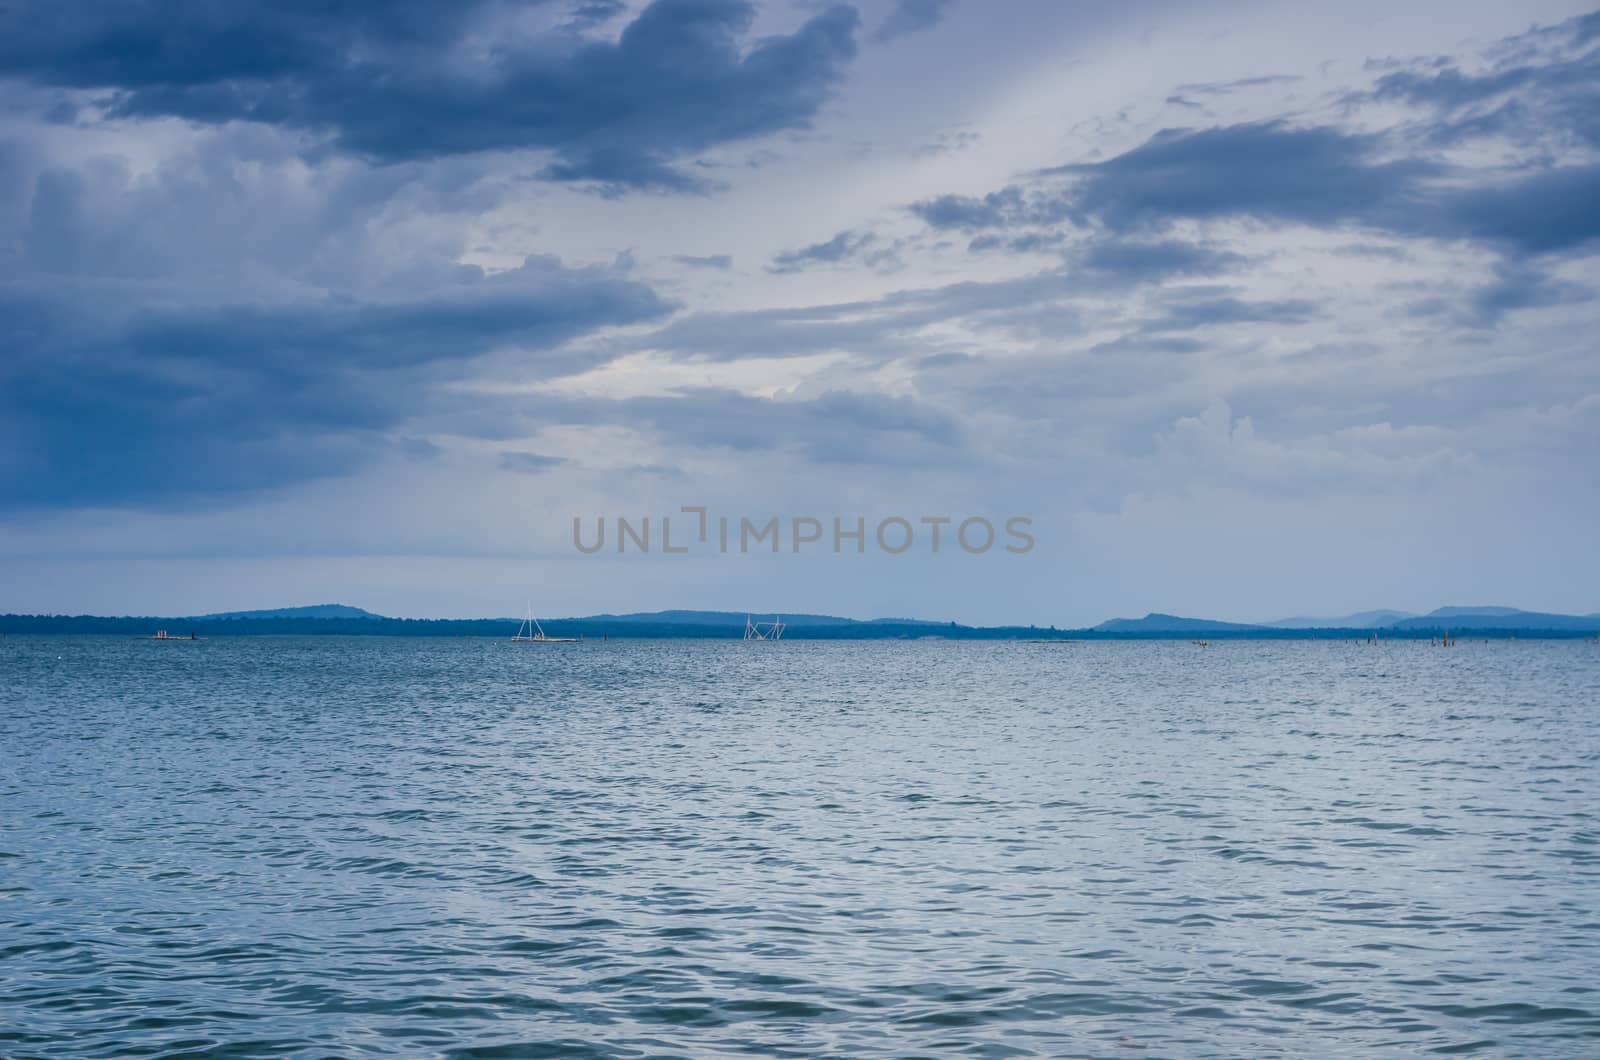 Water and sky in  the Reservoir embankment Sirinthorn Ubonratchatani Thailand